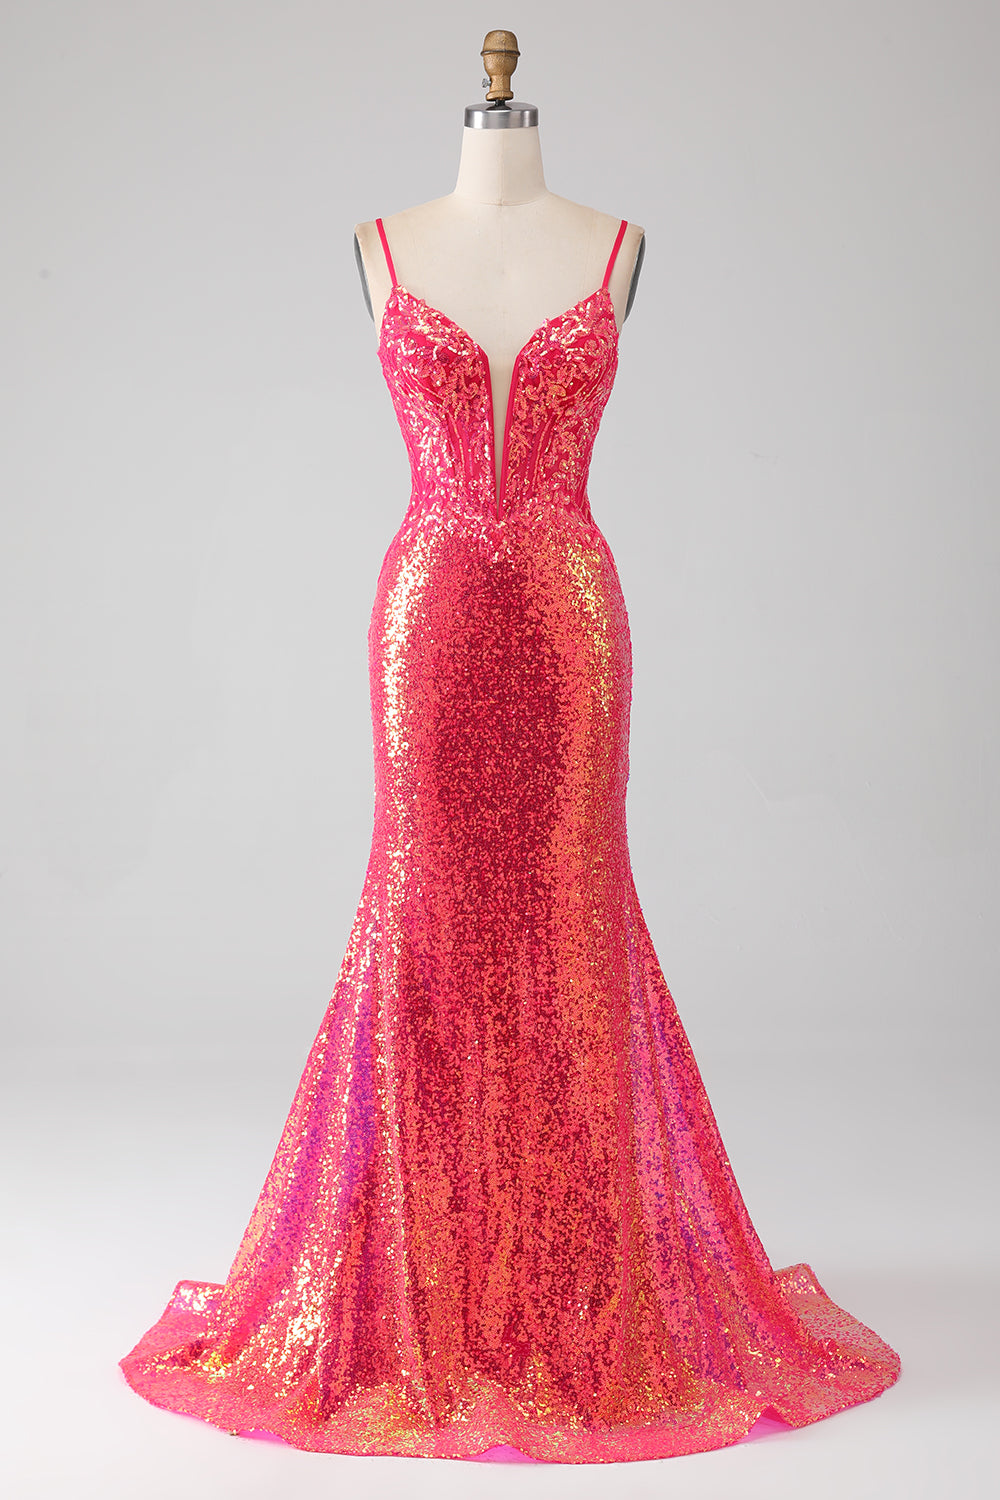 Sparkly Mermaid Fuchsia Prom Dress with Sequins